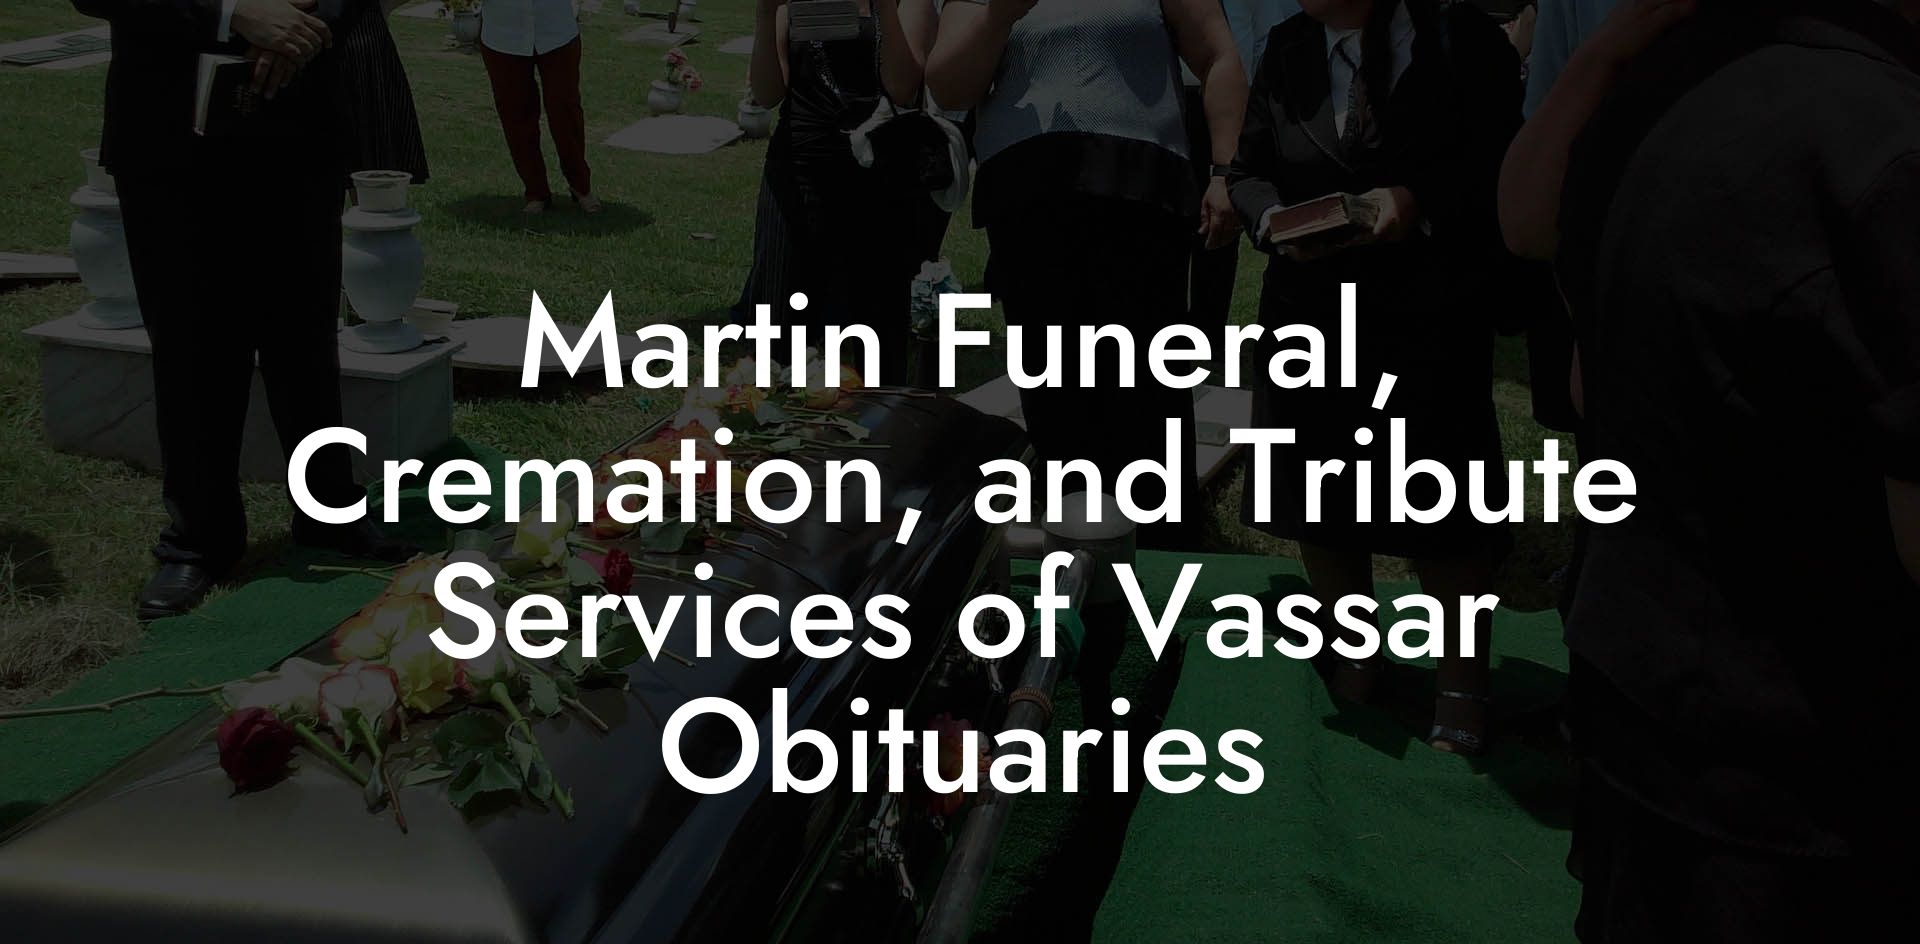 Martin Funeral, Cremation, and Tribute Services of Vassar Obituaries